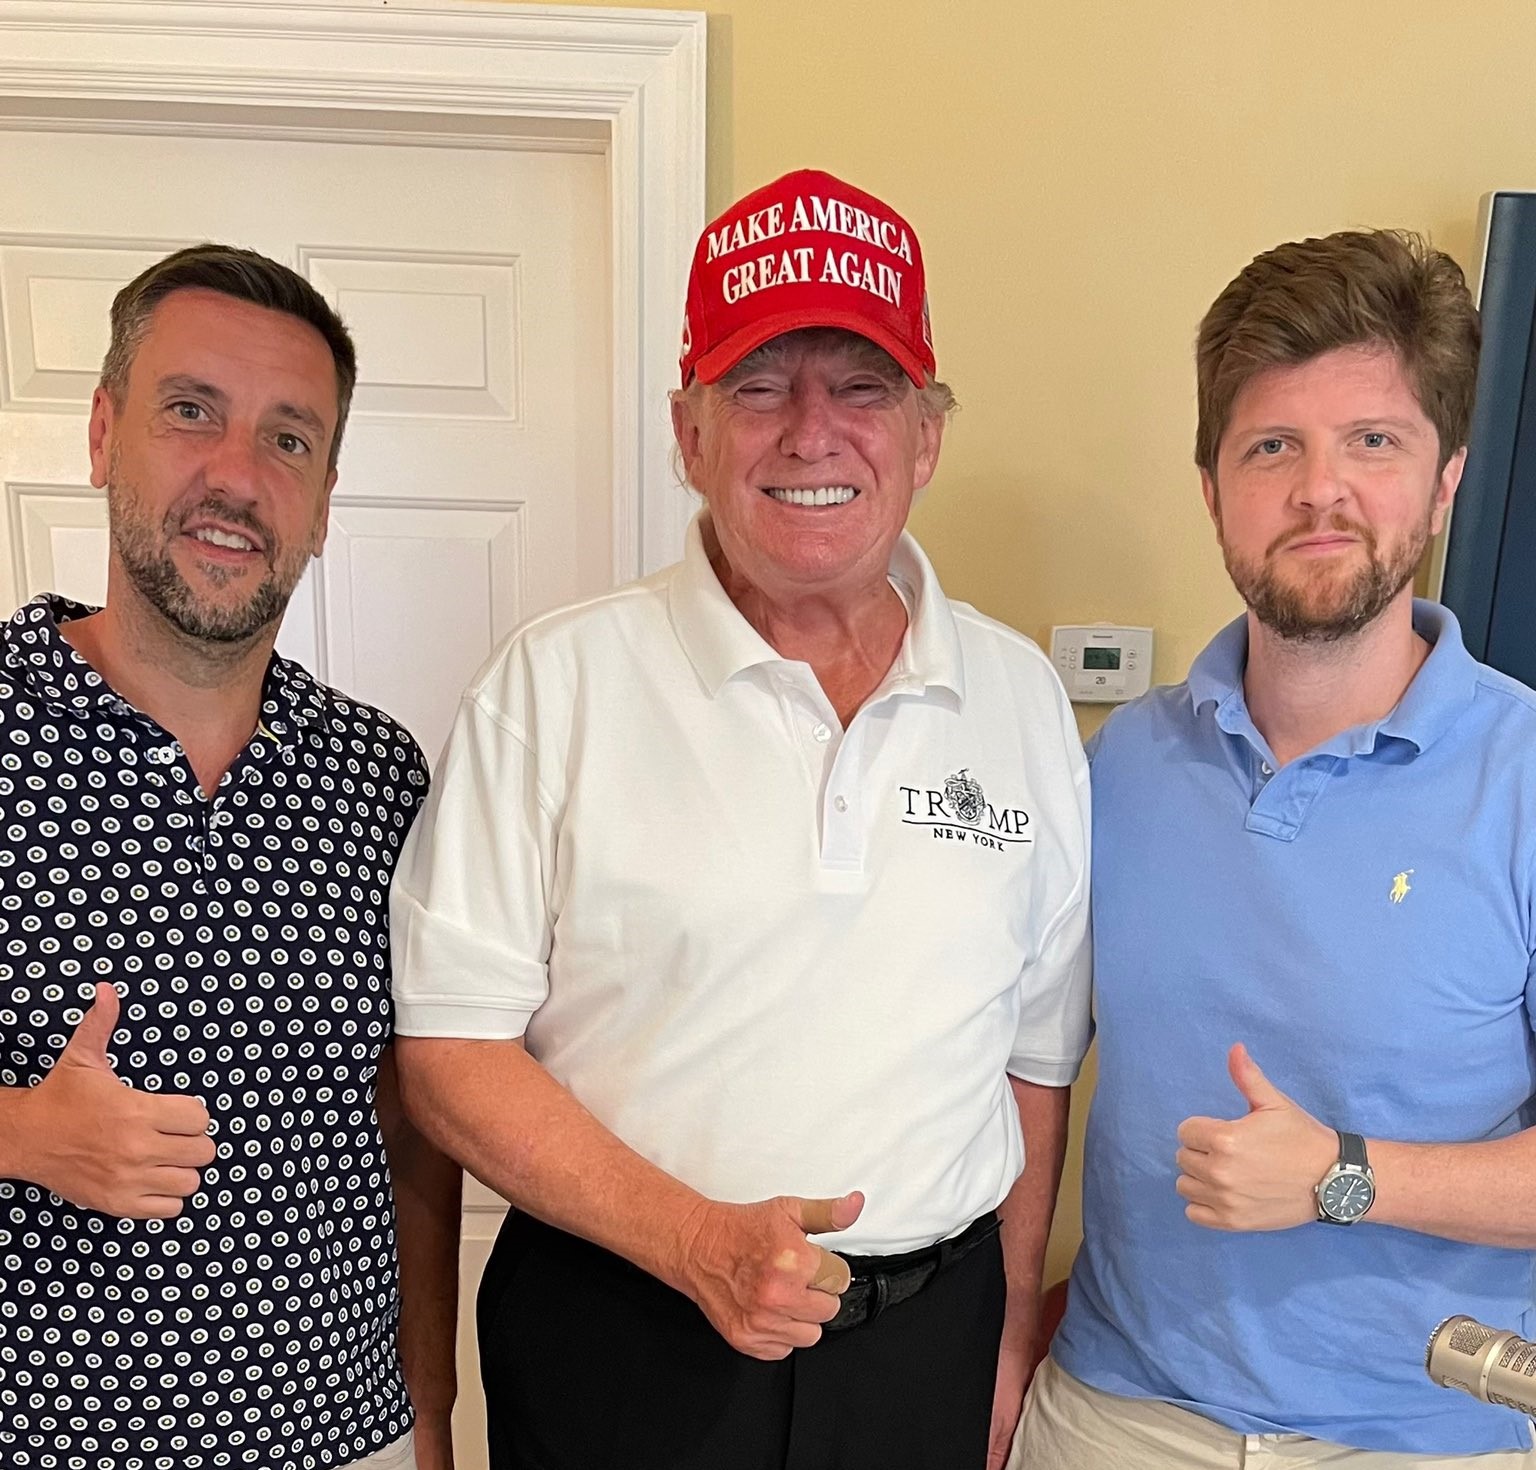 Clay and Buck with Trump